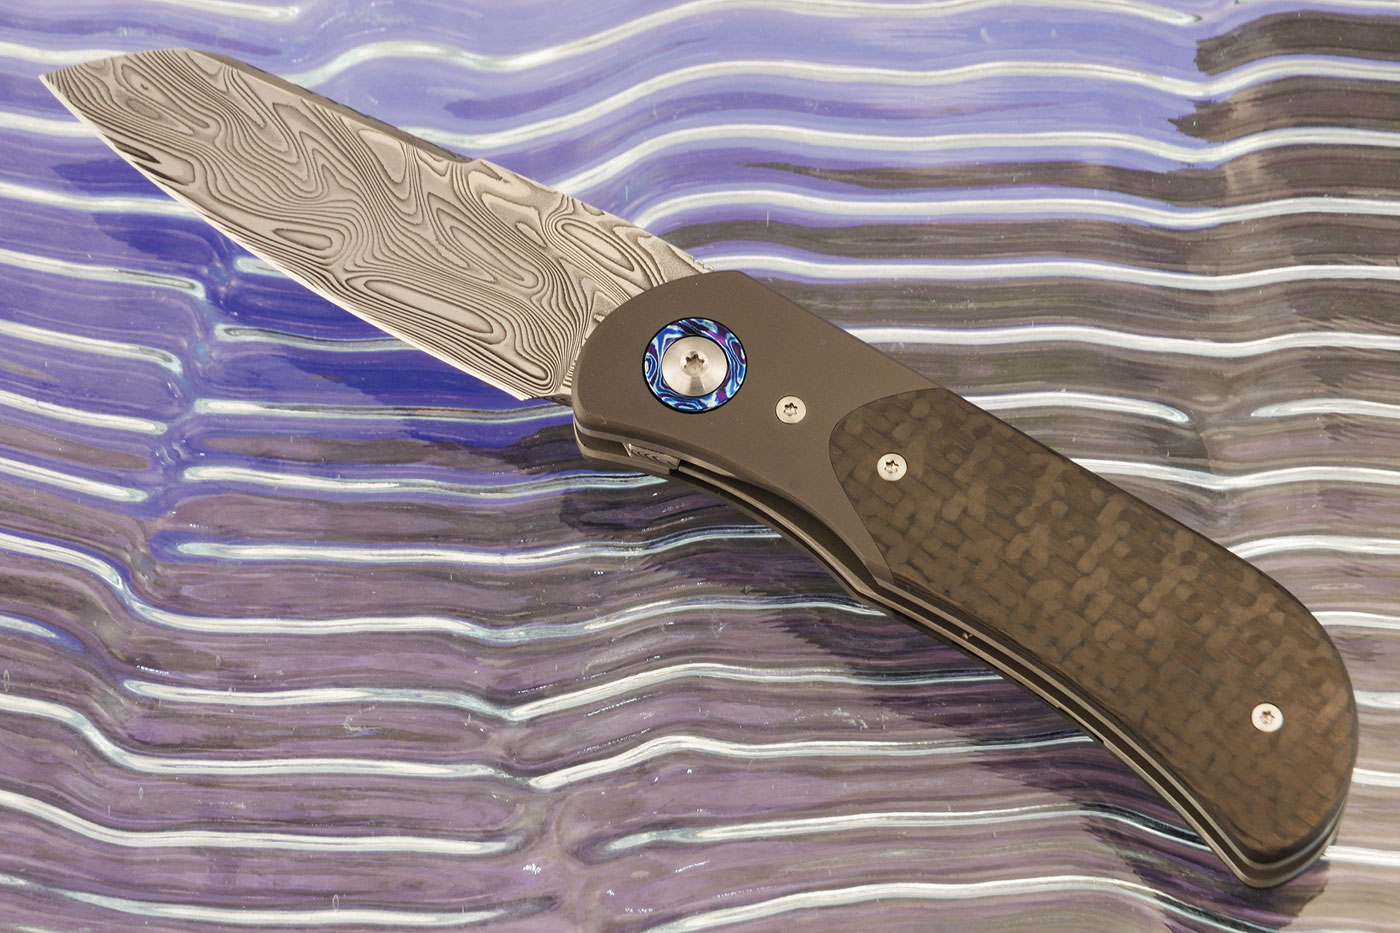 EXK Plus Front Flipper with Carbon Fiber and Timascus - Damasteel